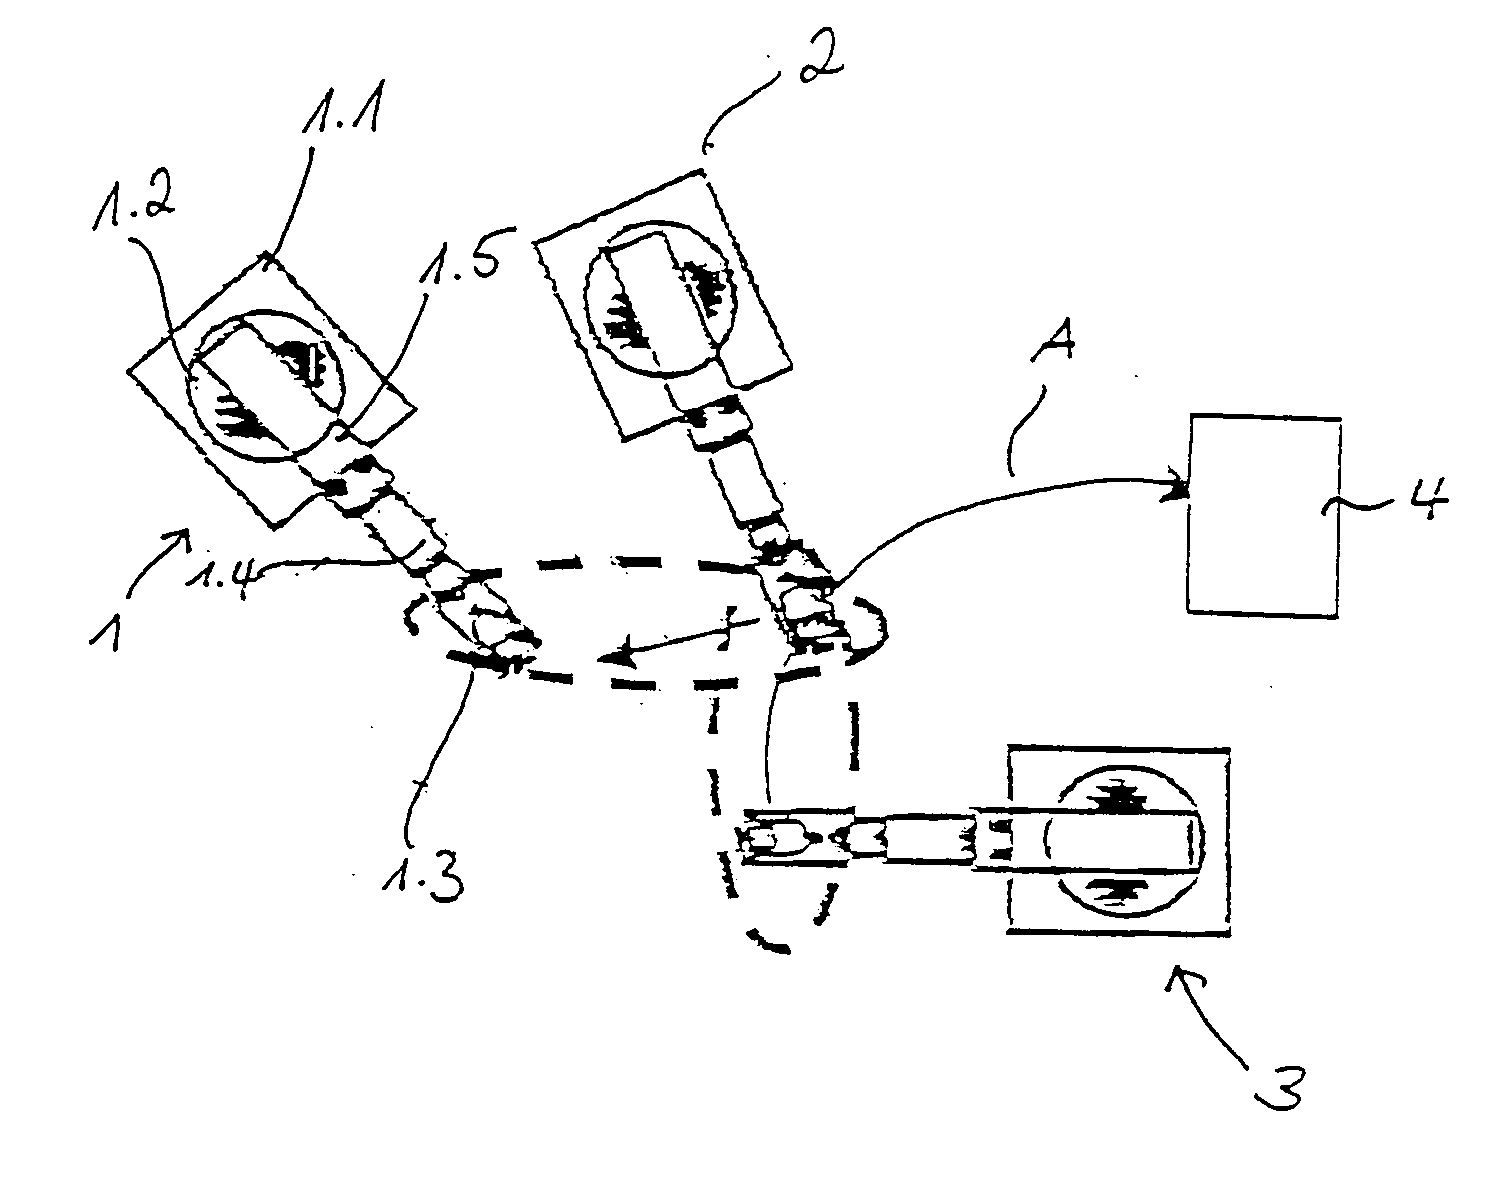 Process for protecting a robot from collisions